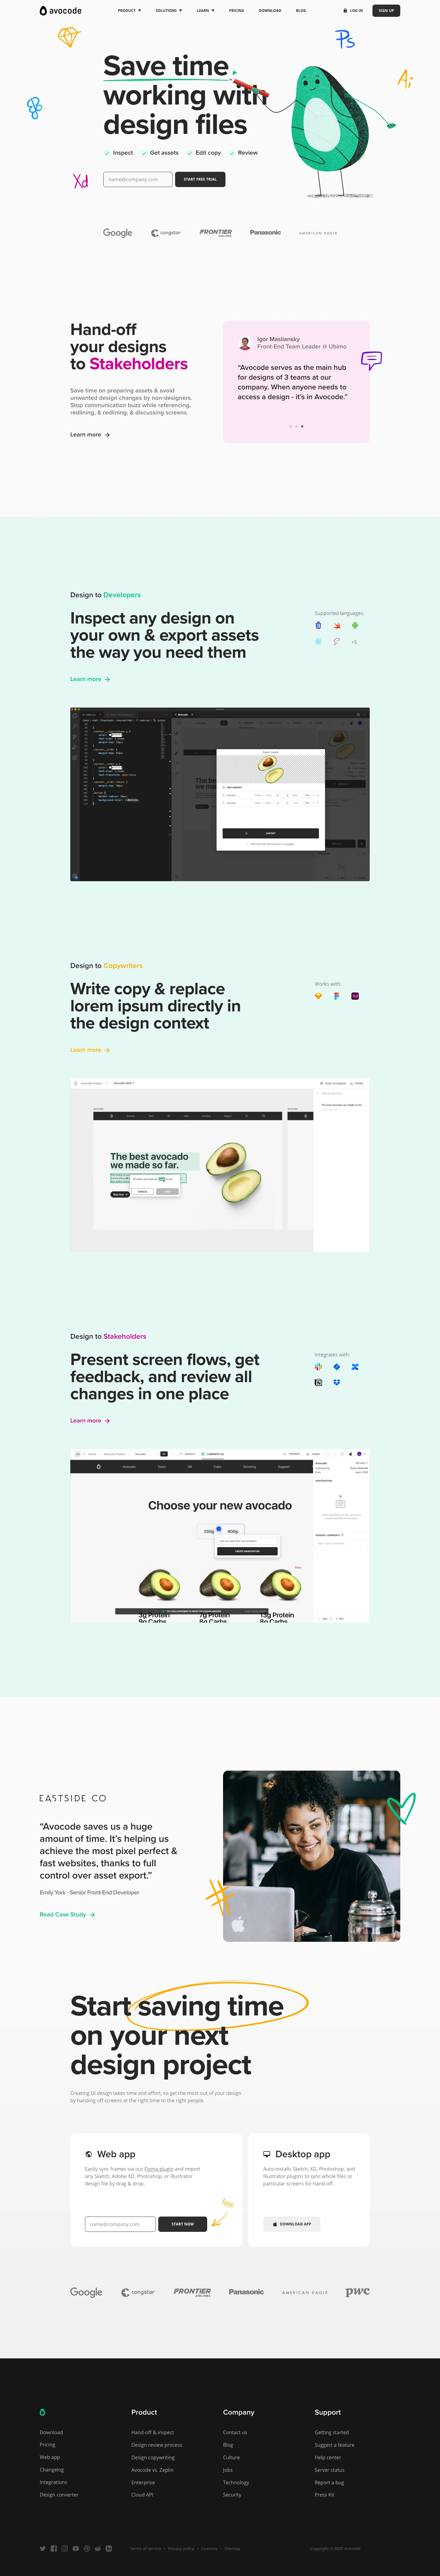 Avocode Landing Page Example: Centralize design collaboration, developer hand-off, version control, screen flows, & feedback in one tool. Work with Sketch, Adobe XD, Photoshop, Illustrator, and Figma designs on macOS, Windows, and Linux.